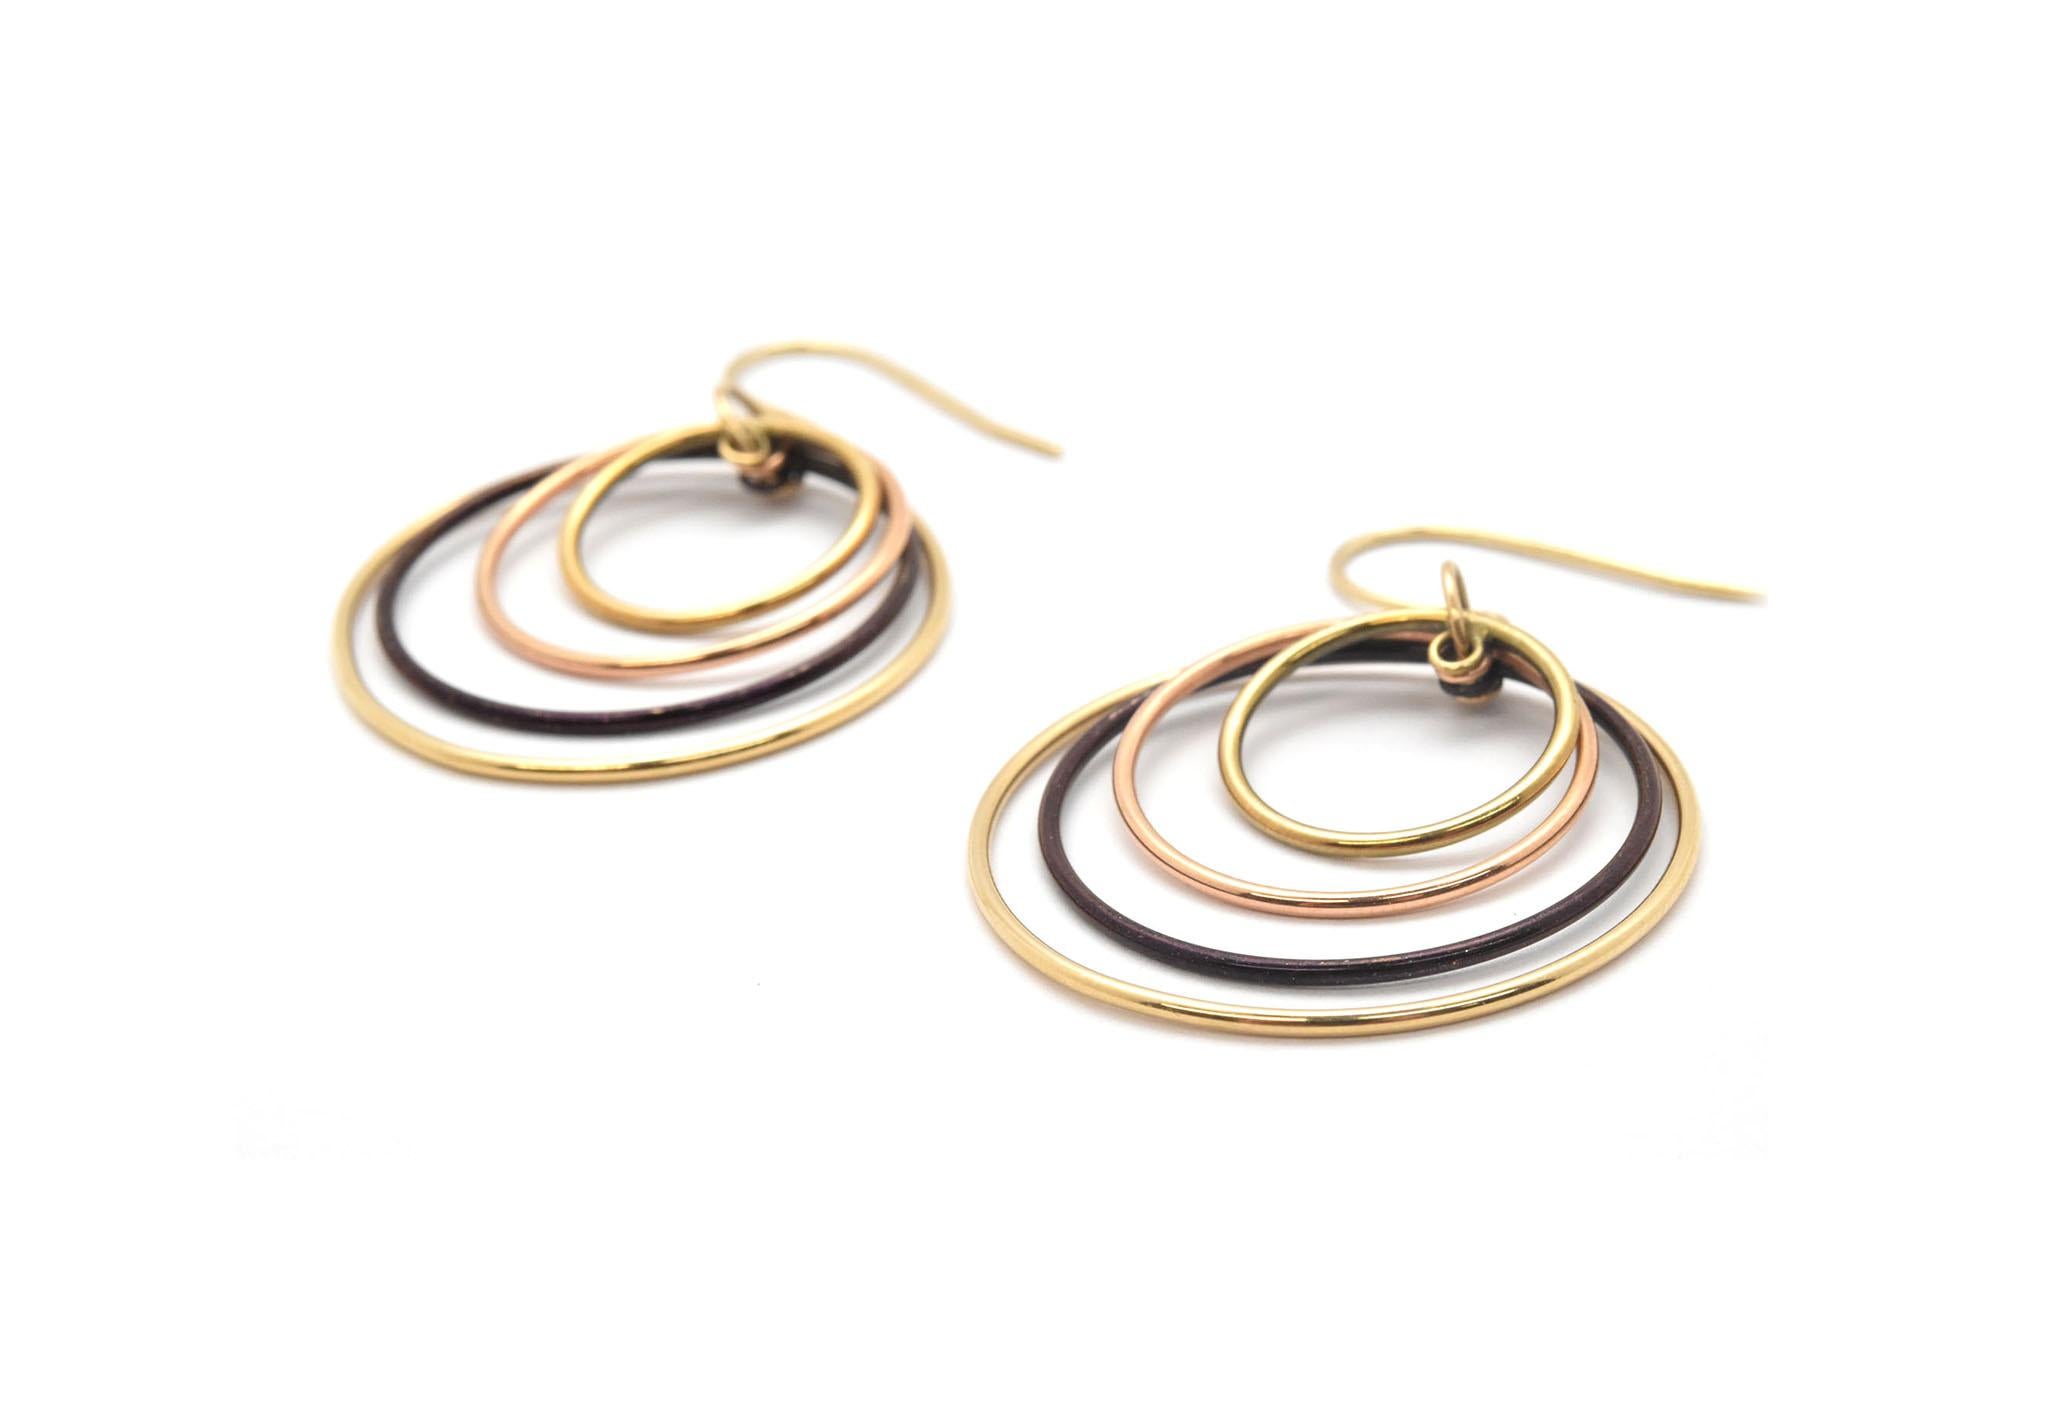 This unique dangle style earrings are designed in 14k yellow gold, rose gold and black rhodium. Dangling from the fish hook backs, there is a loop holding all of the dangling circles. Each circle differs in size, the smallest circle is round and